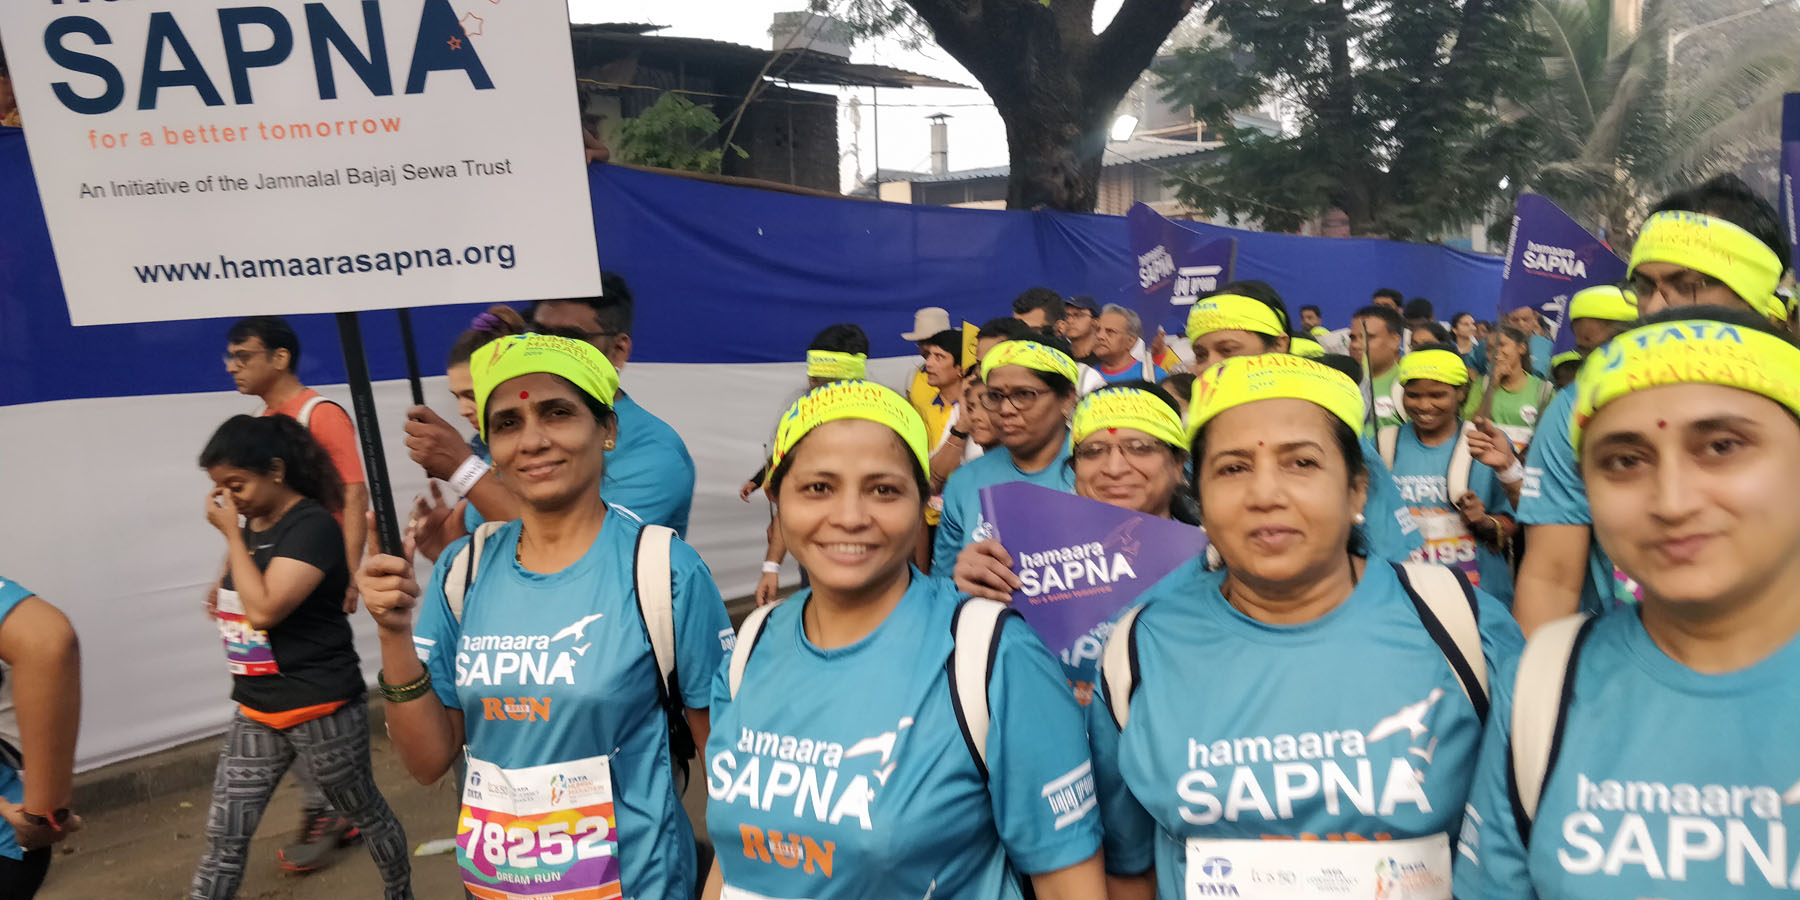 Project Director, Staff and beneficiaries of Hamaara Sapna doing the dream run. Happy hearts and smiling faces